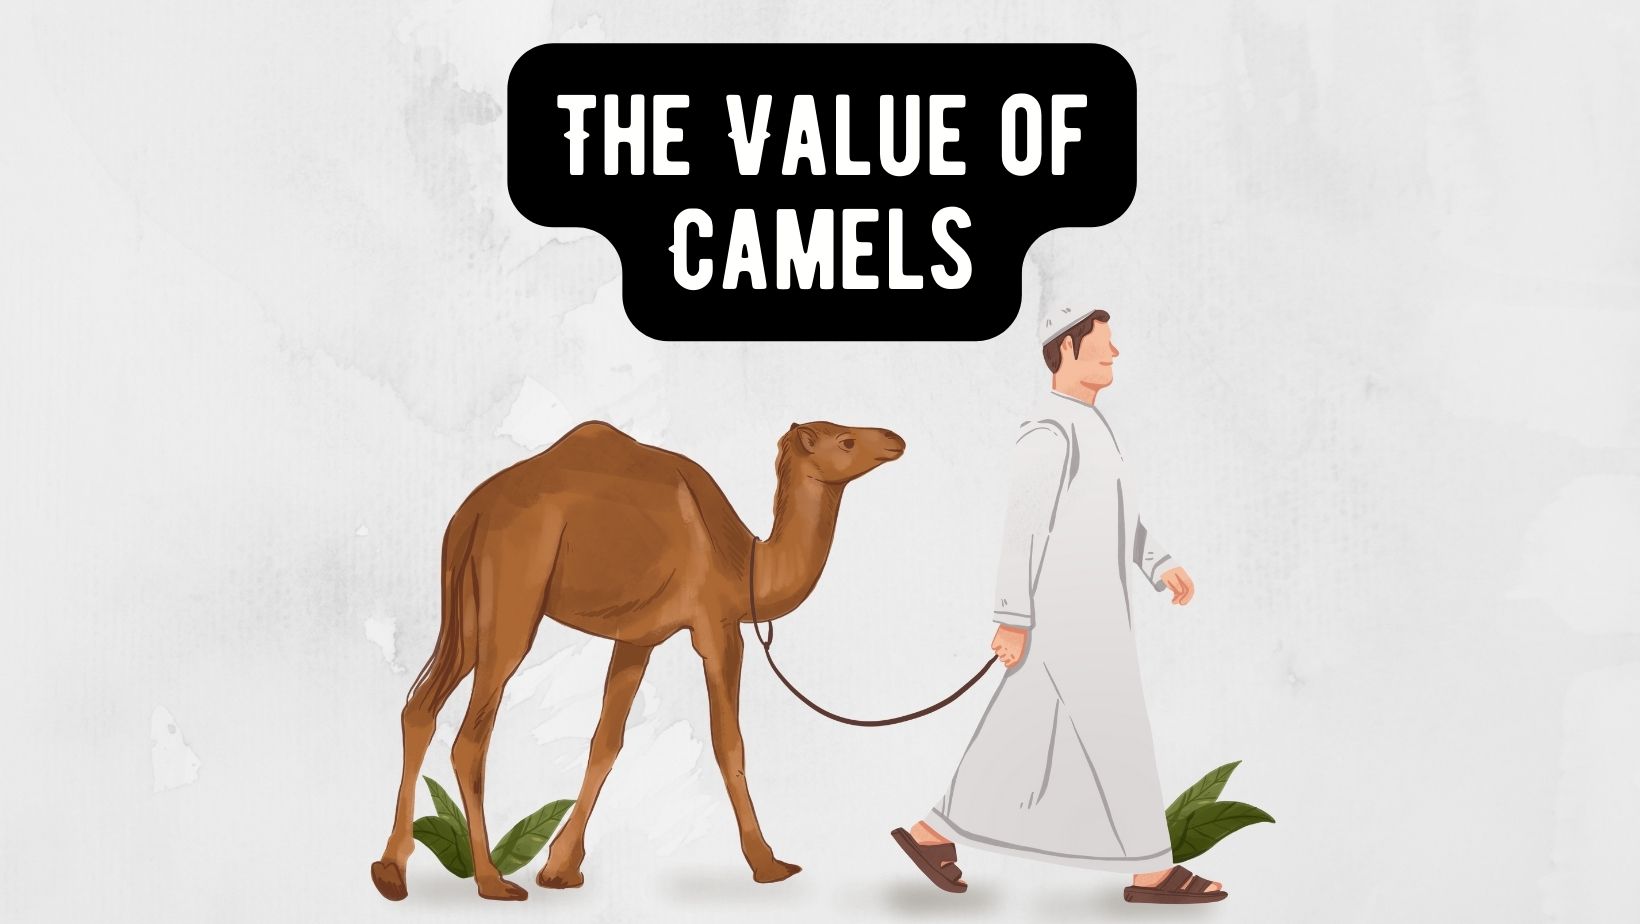 The Value of Camels